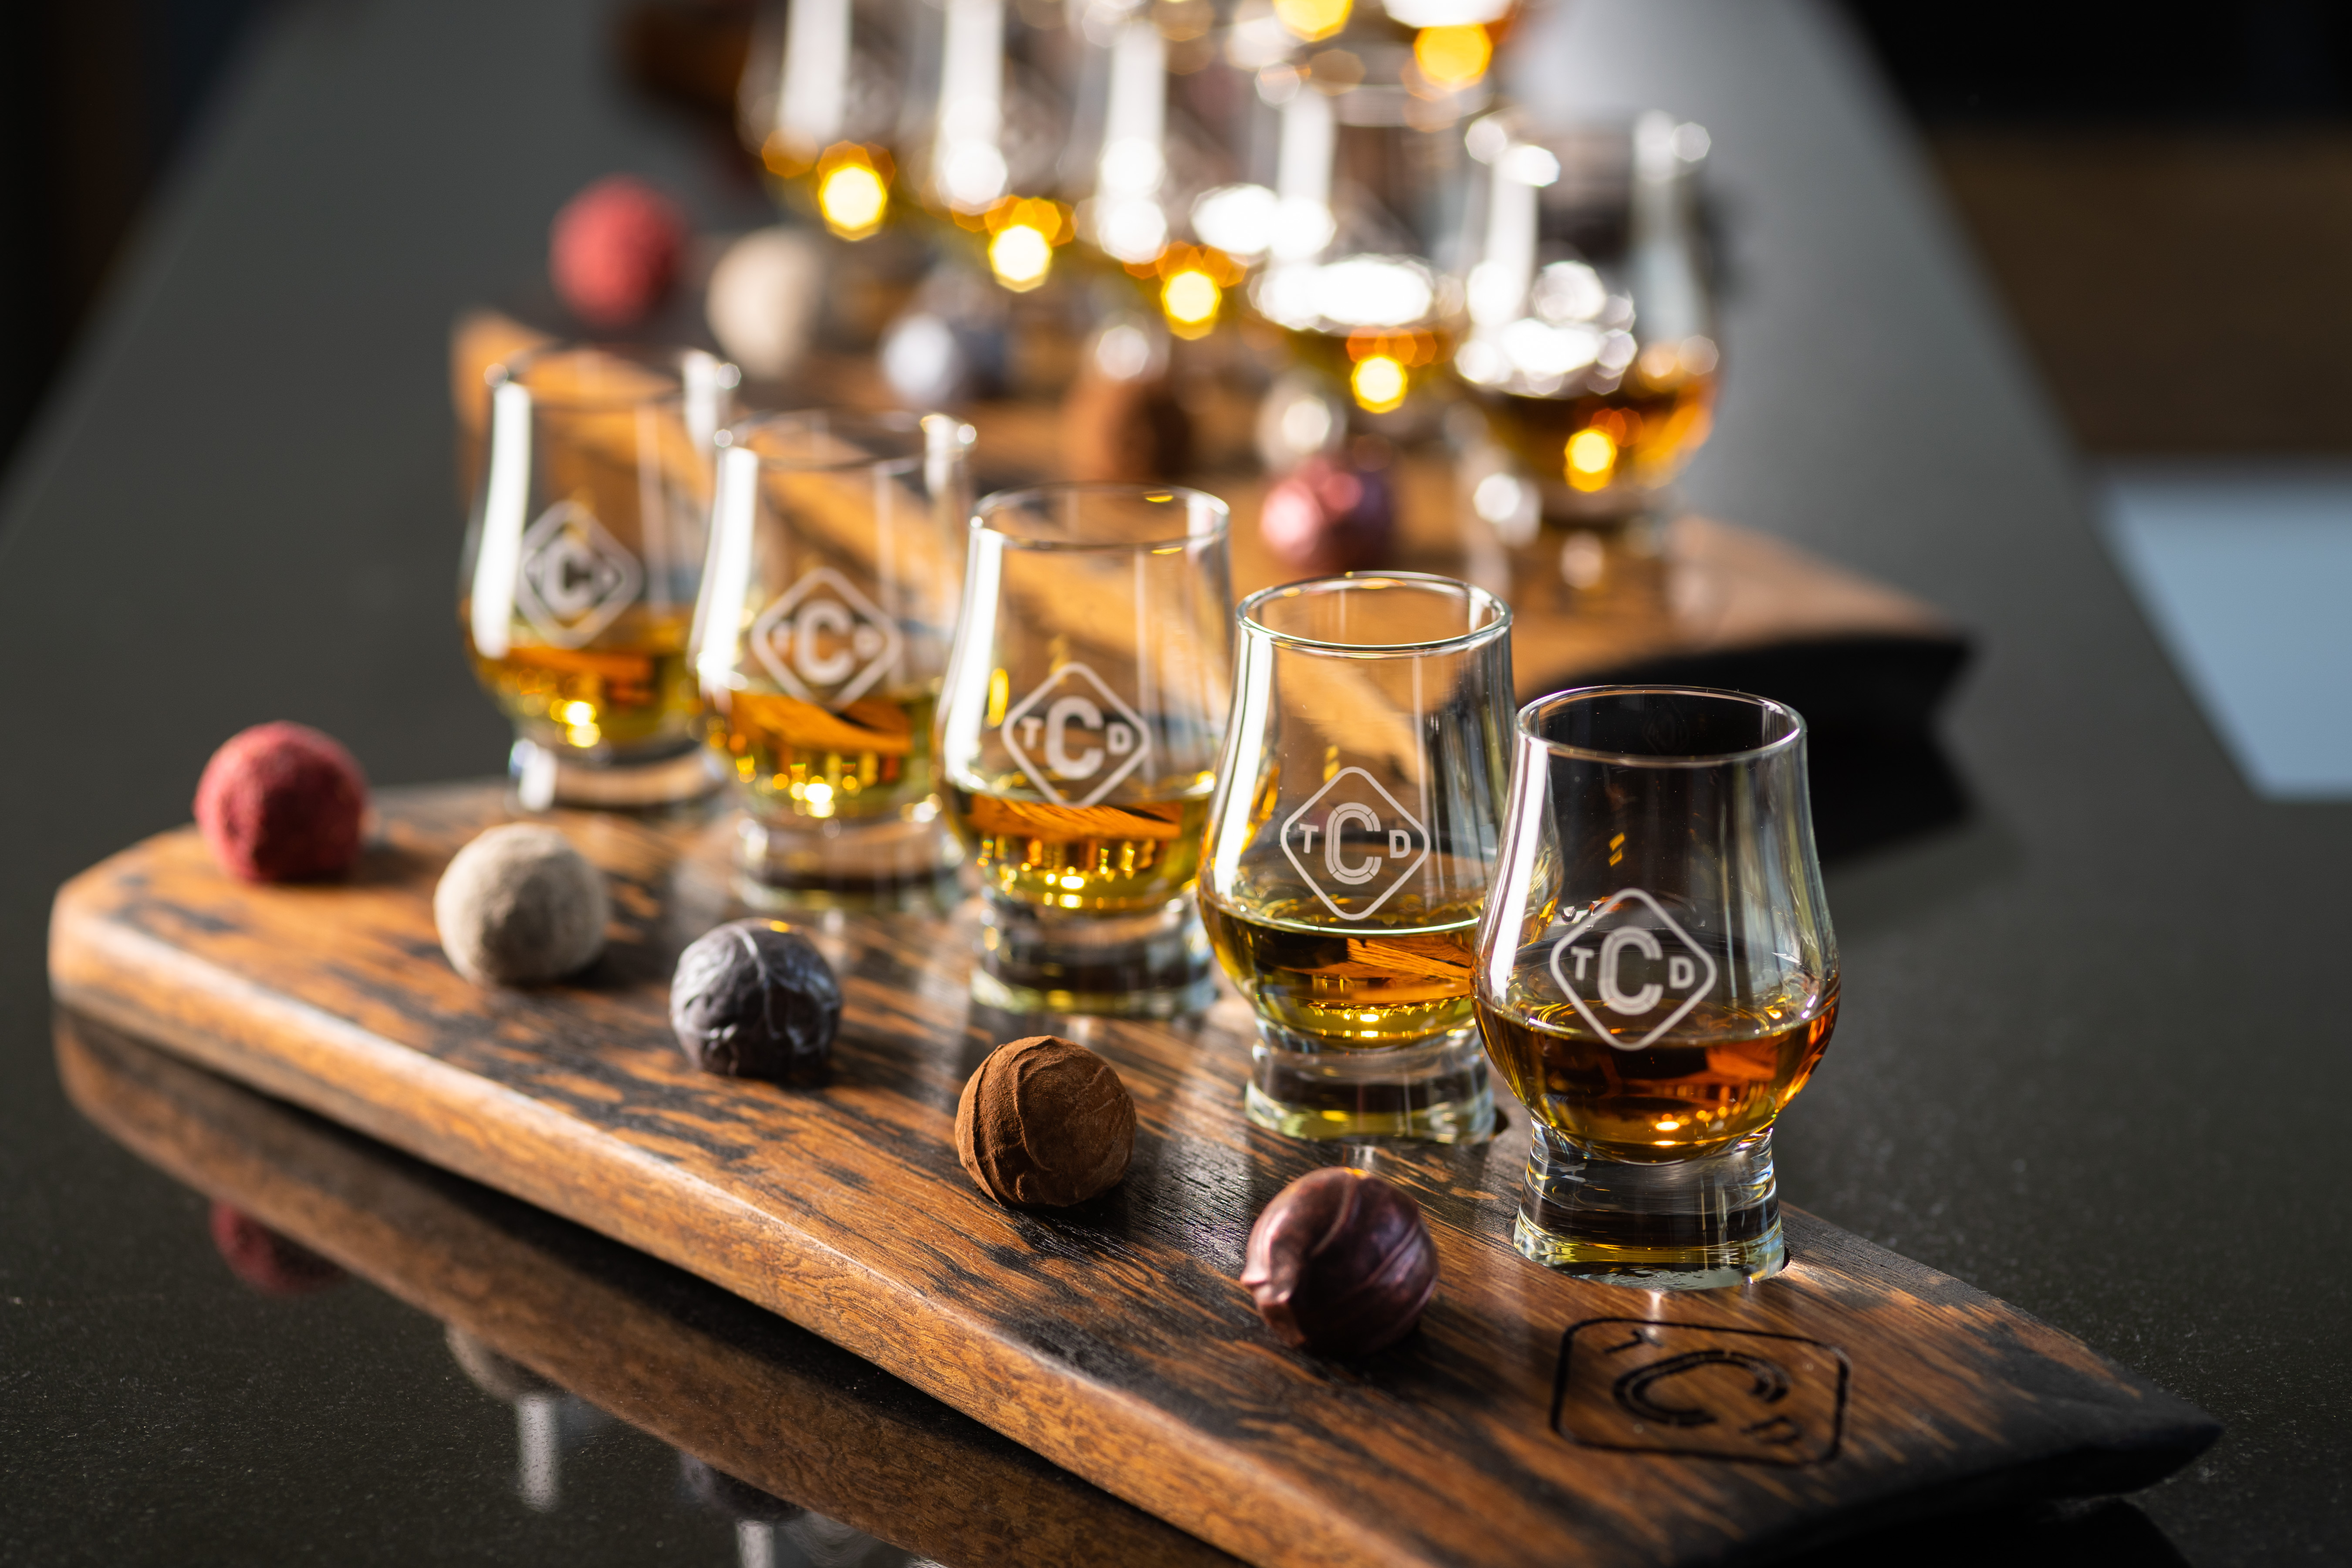 Five chocolate & whisky pairings available at The Clydeside Distillery